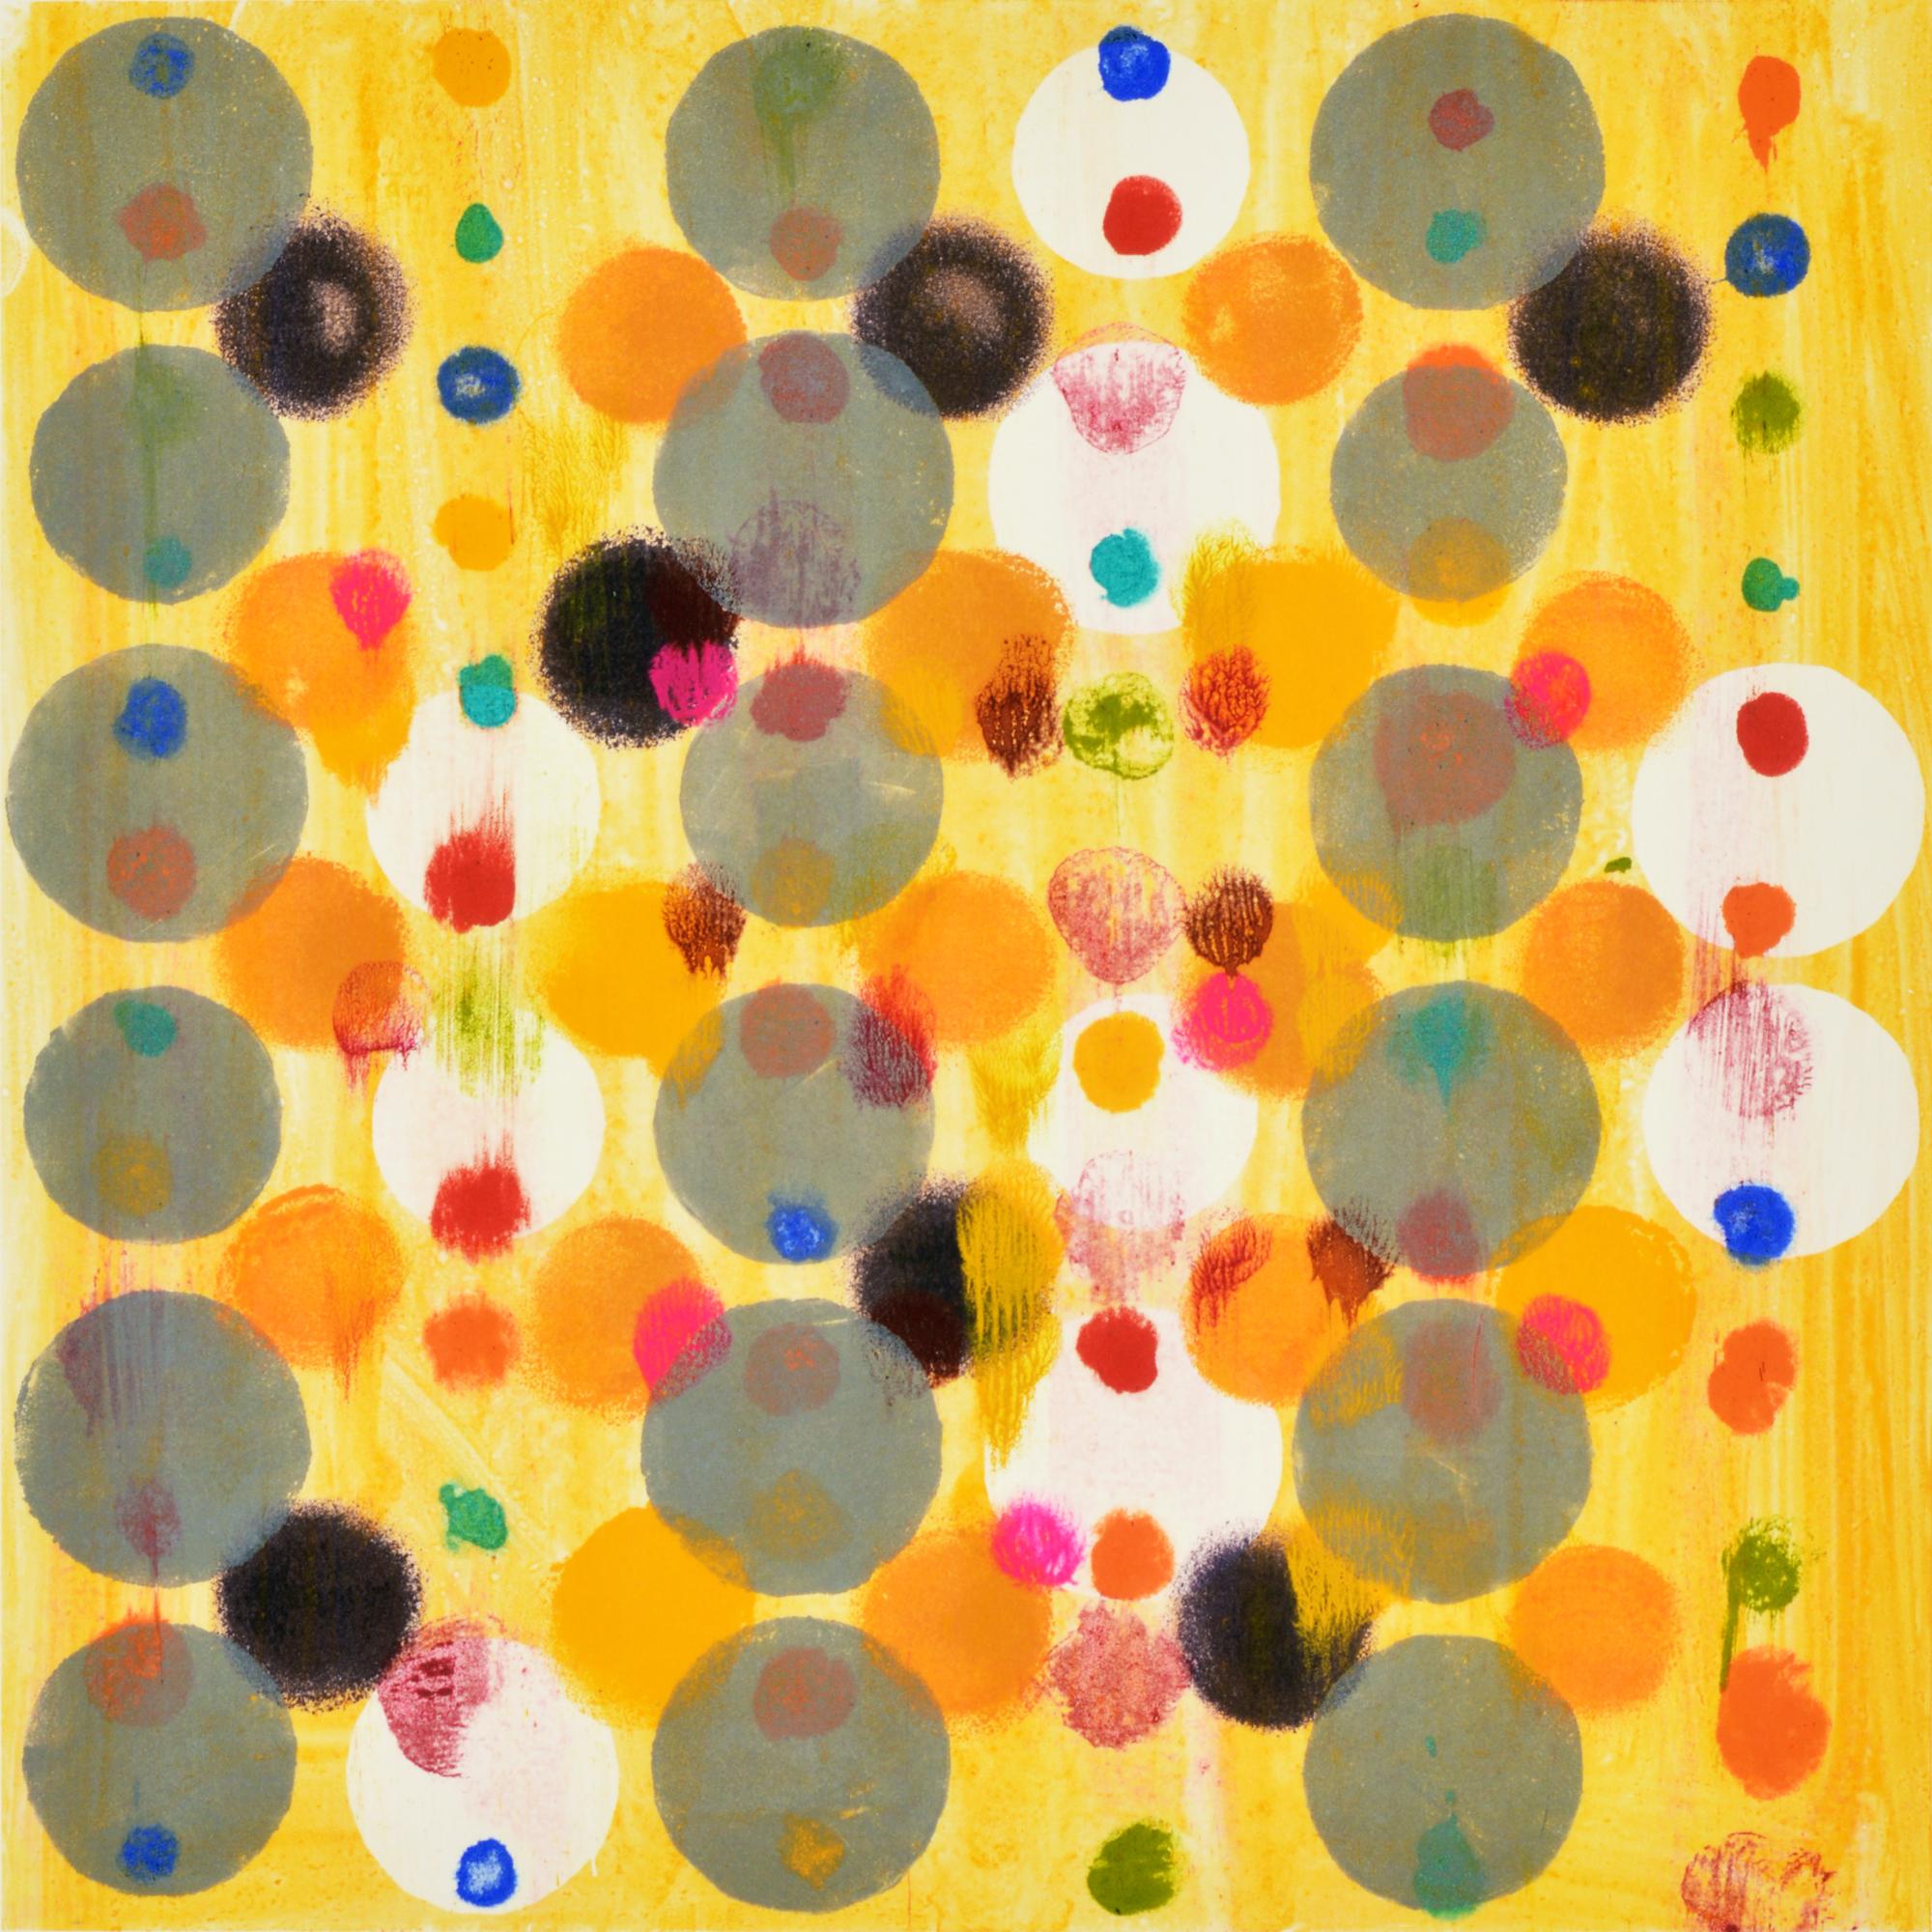 Janine Wong Abstract Print - "Dot Variant 9", color dots, abstract, orange, yellow, pink, green, blue, red